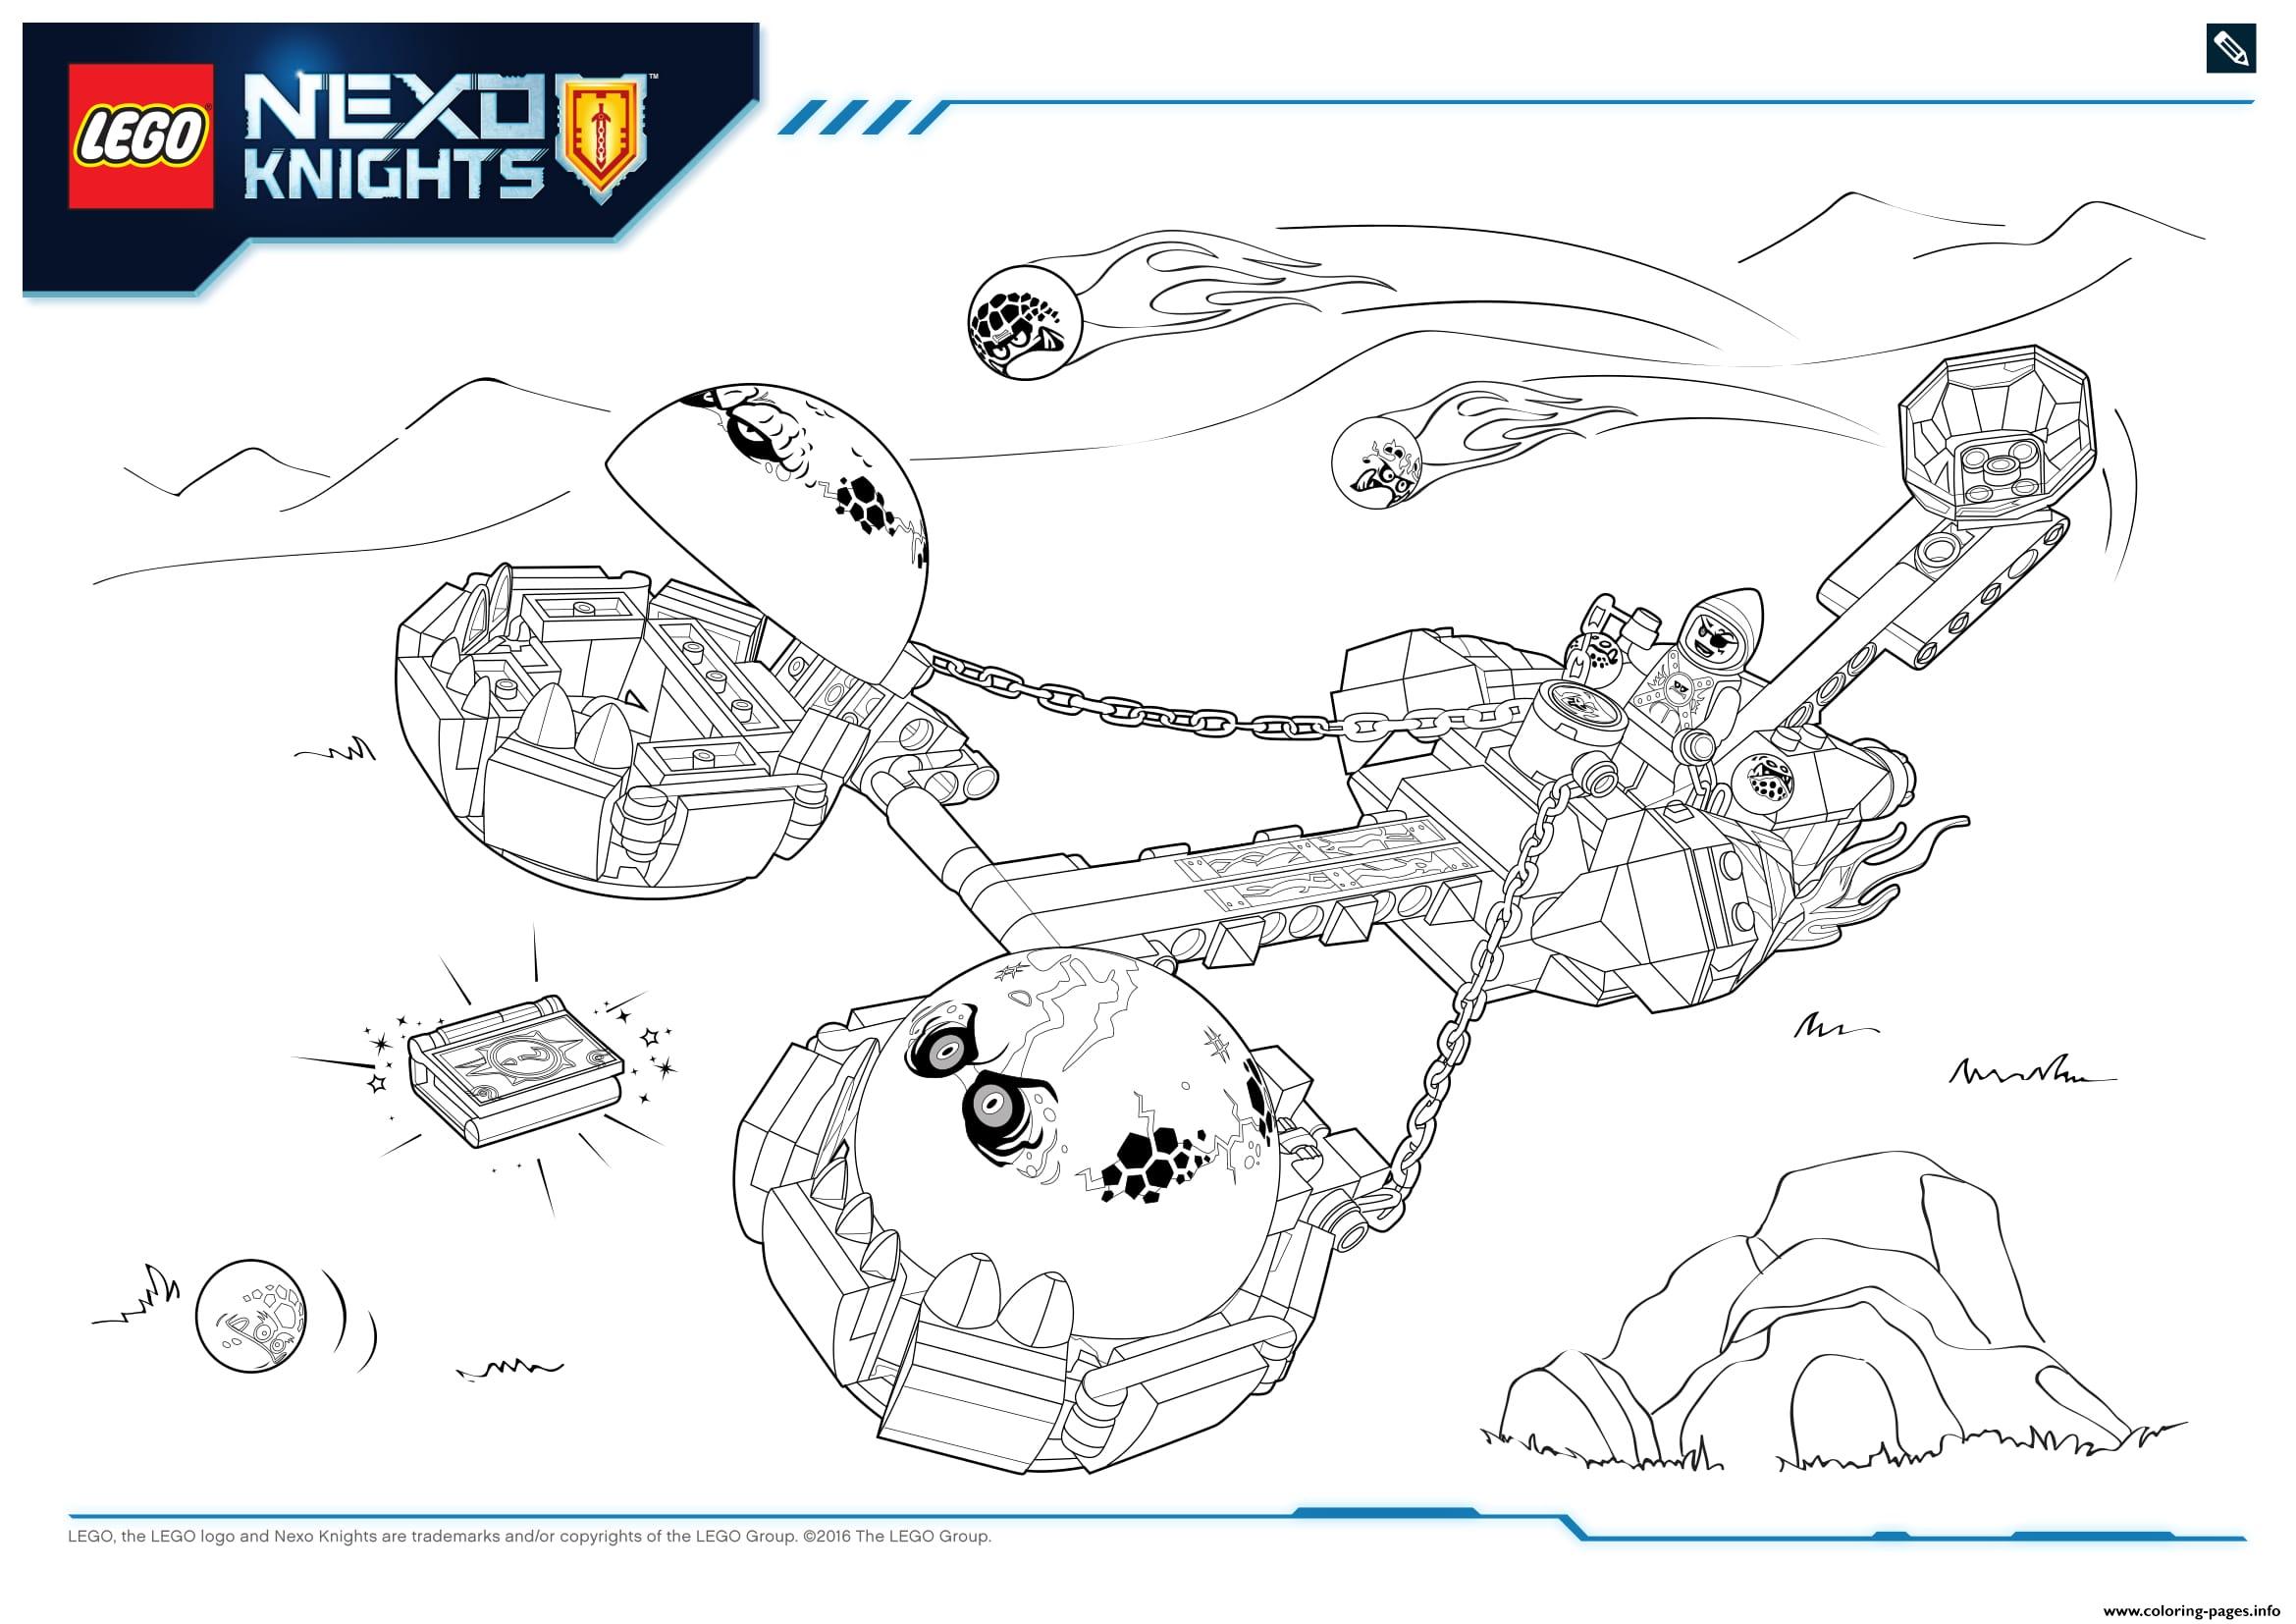 Lego Nexo Knights Monster Productss 2 coloring